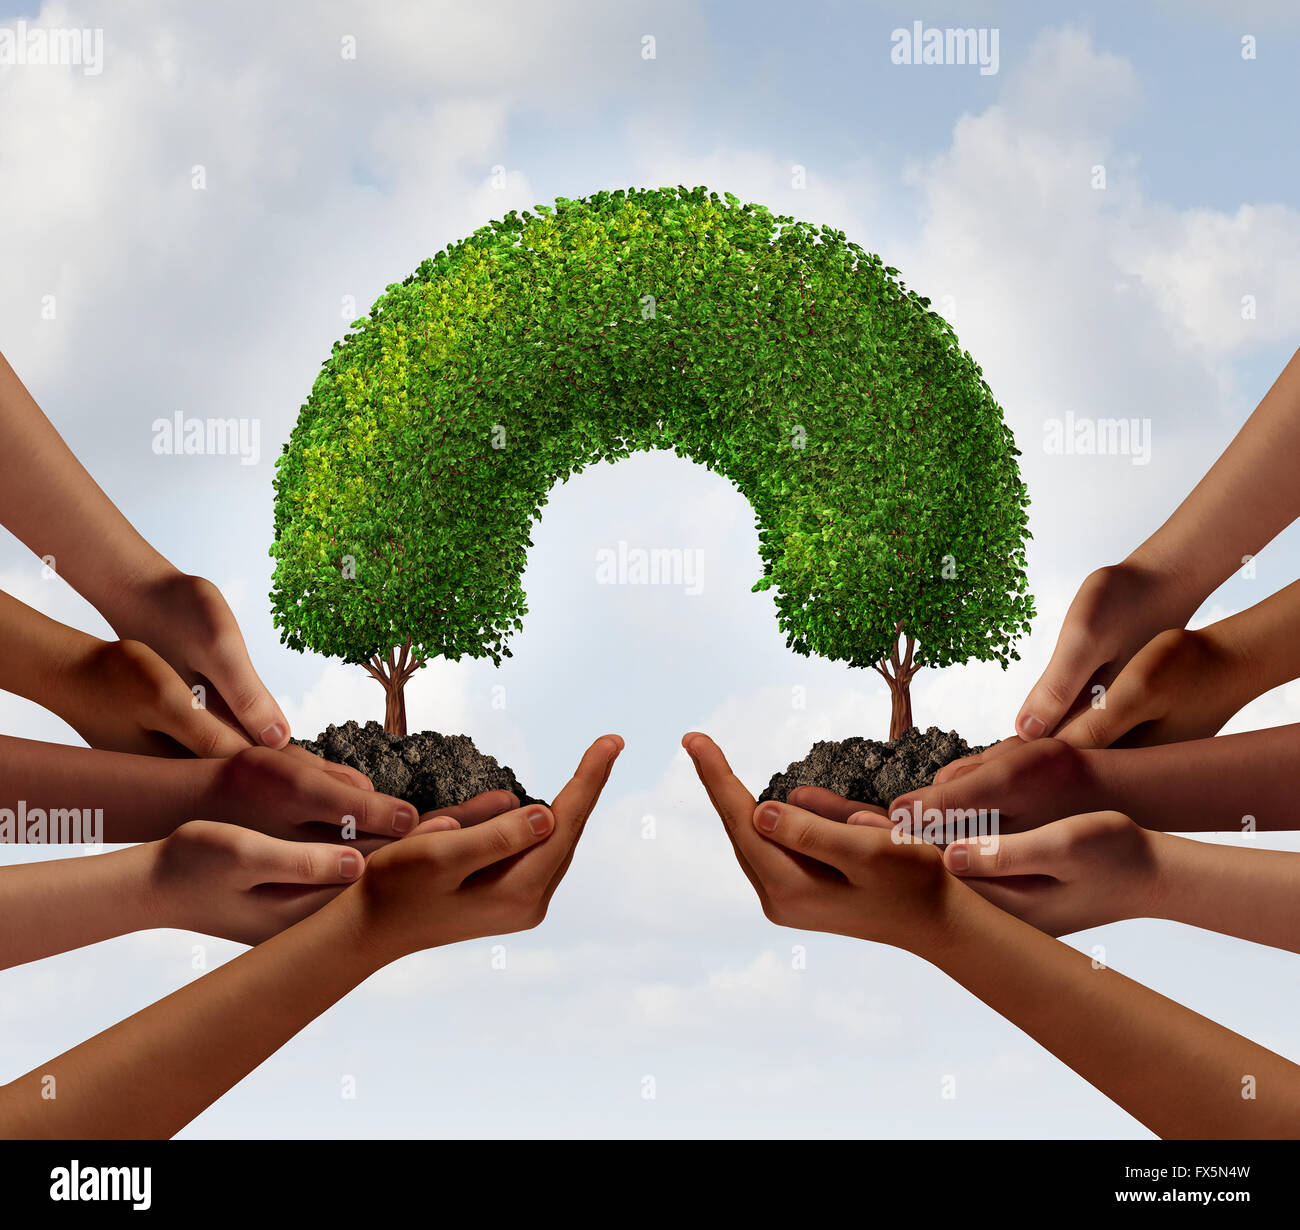 Group success business concept as two groups of diverse people making a connection with 3D illustration trees that link together as a metaphor for global cooperation or environment teamwork. Stock Photo